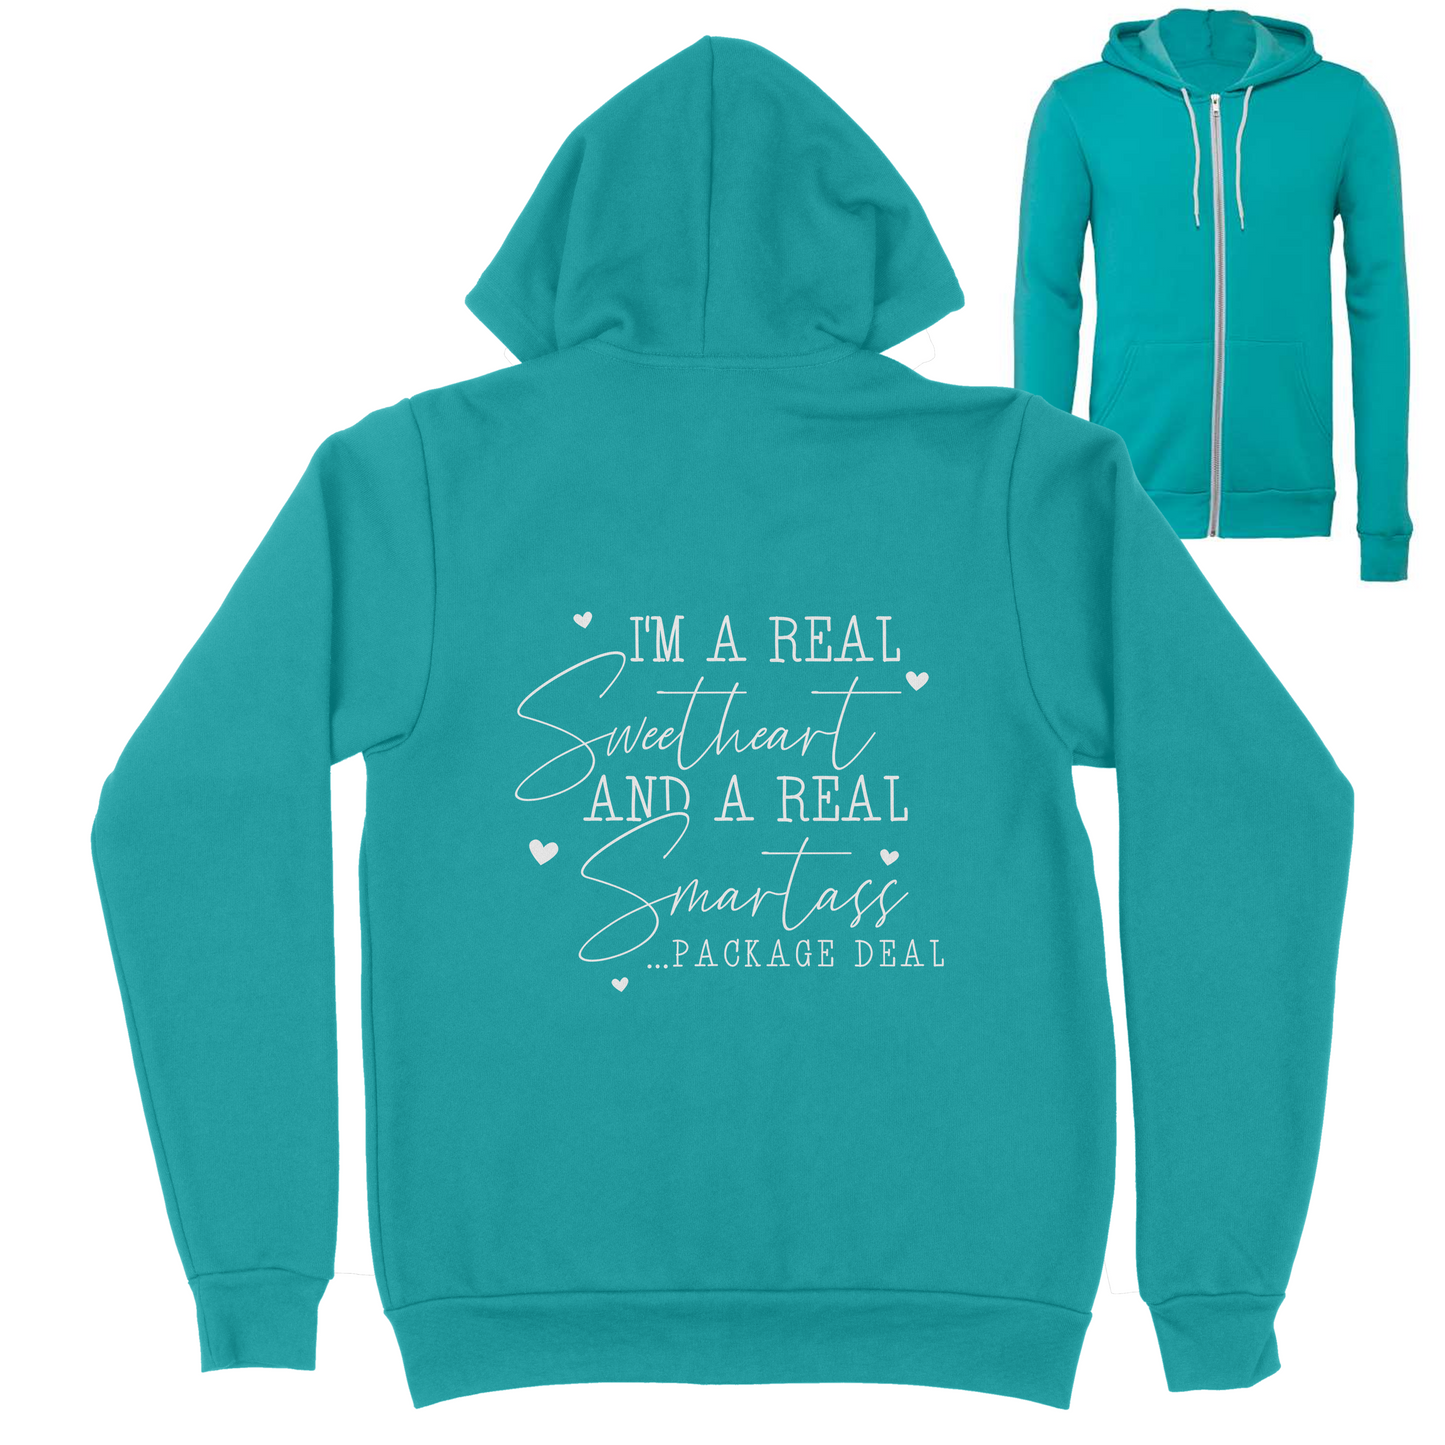 I'm A Real Sweetheart and Smartass Package Deal Zip Up Hoodie